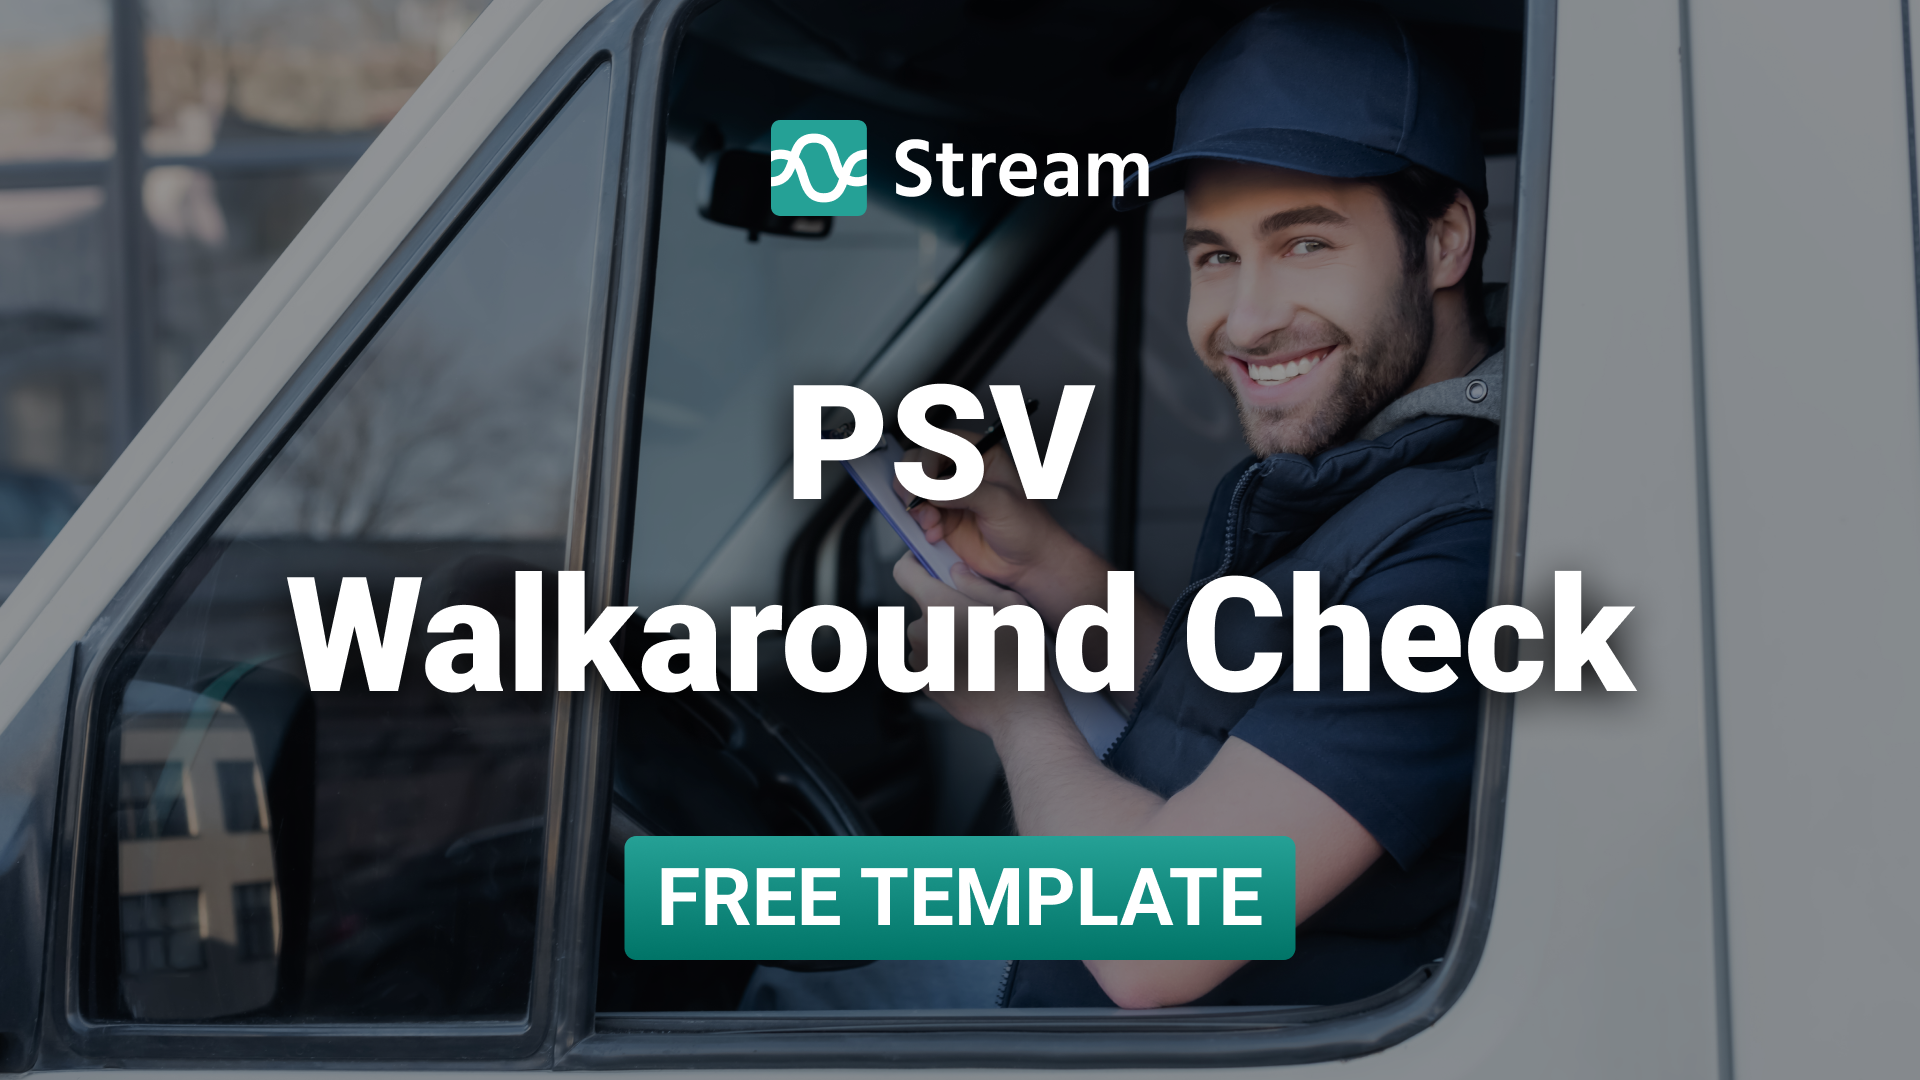 PSV-Walkaround-Check-Template-FREE-Download-Featured-Image